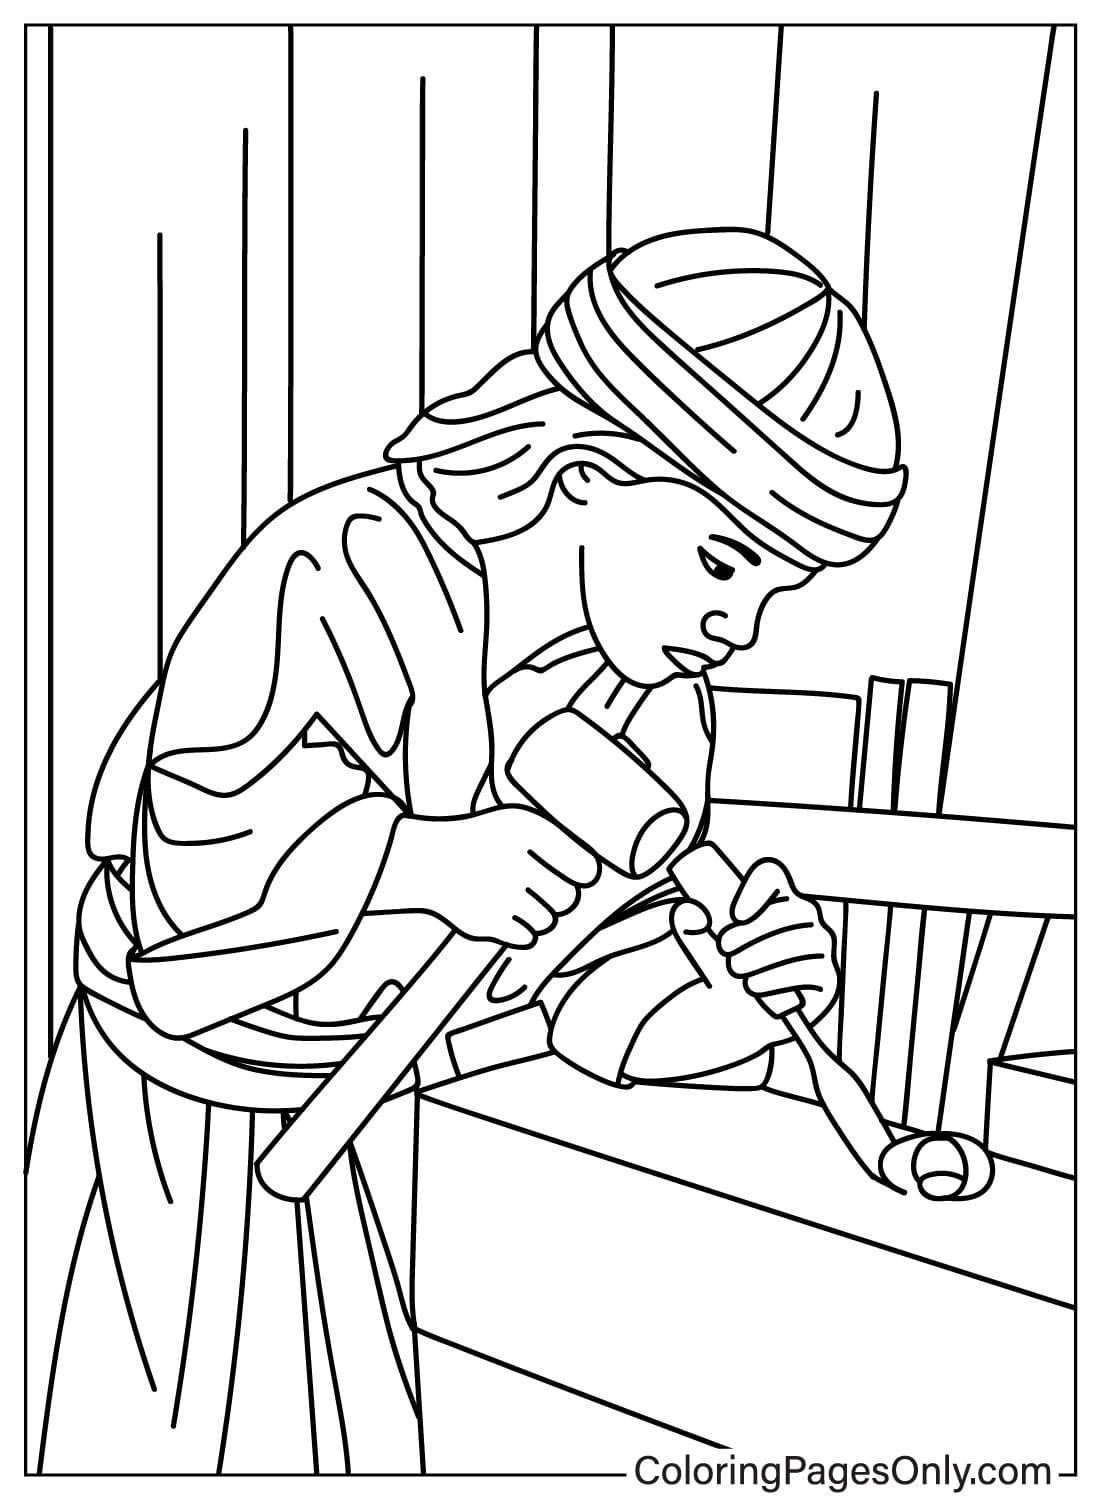 Jesus Was a Carpenter Coloring Page from Jesus